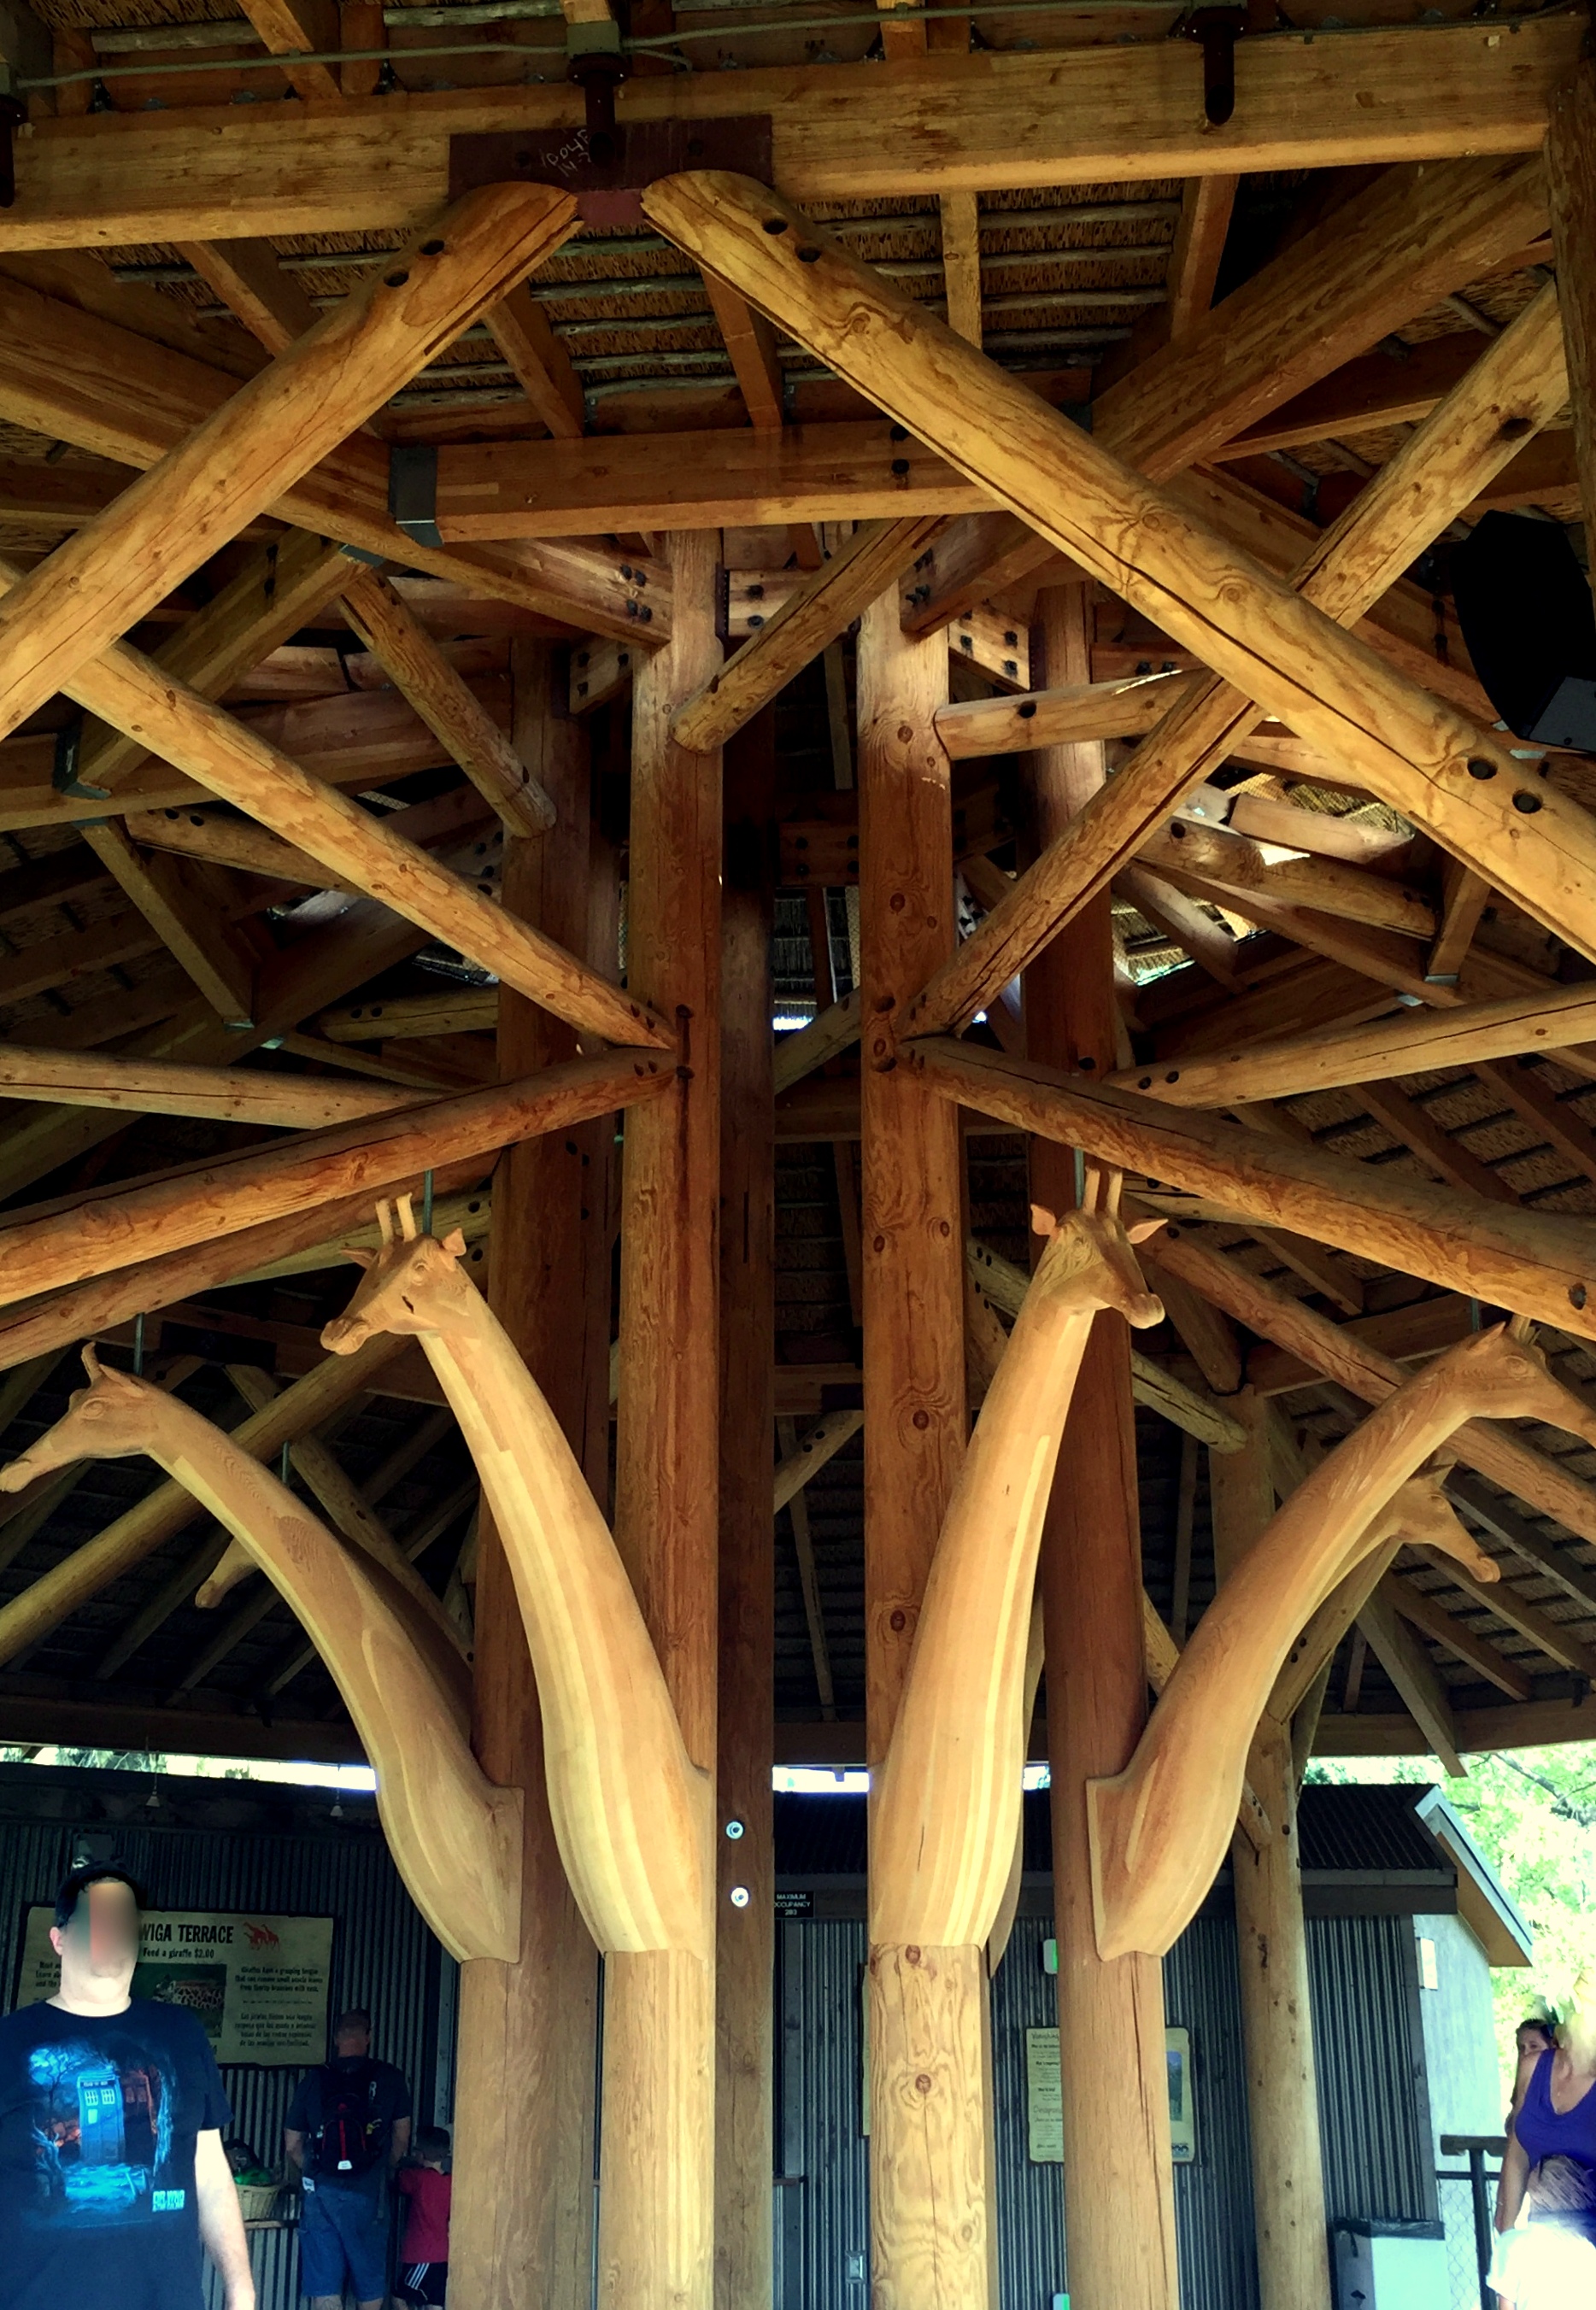 Beautiful beams and carved giraffes decorate the giraffe feeding and viewing area